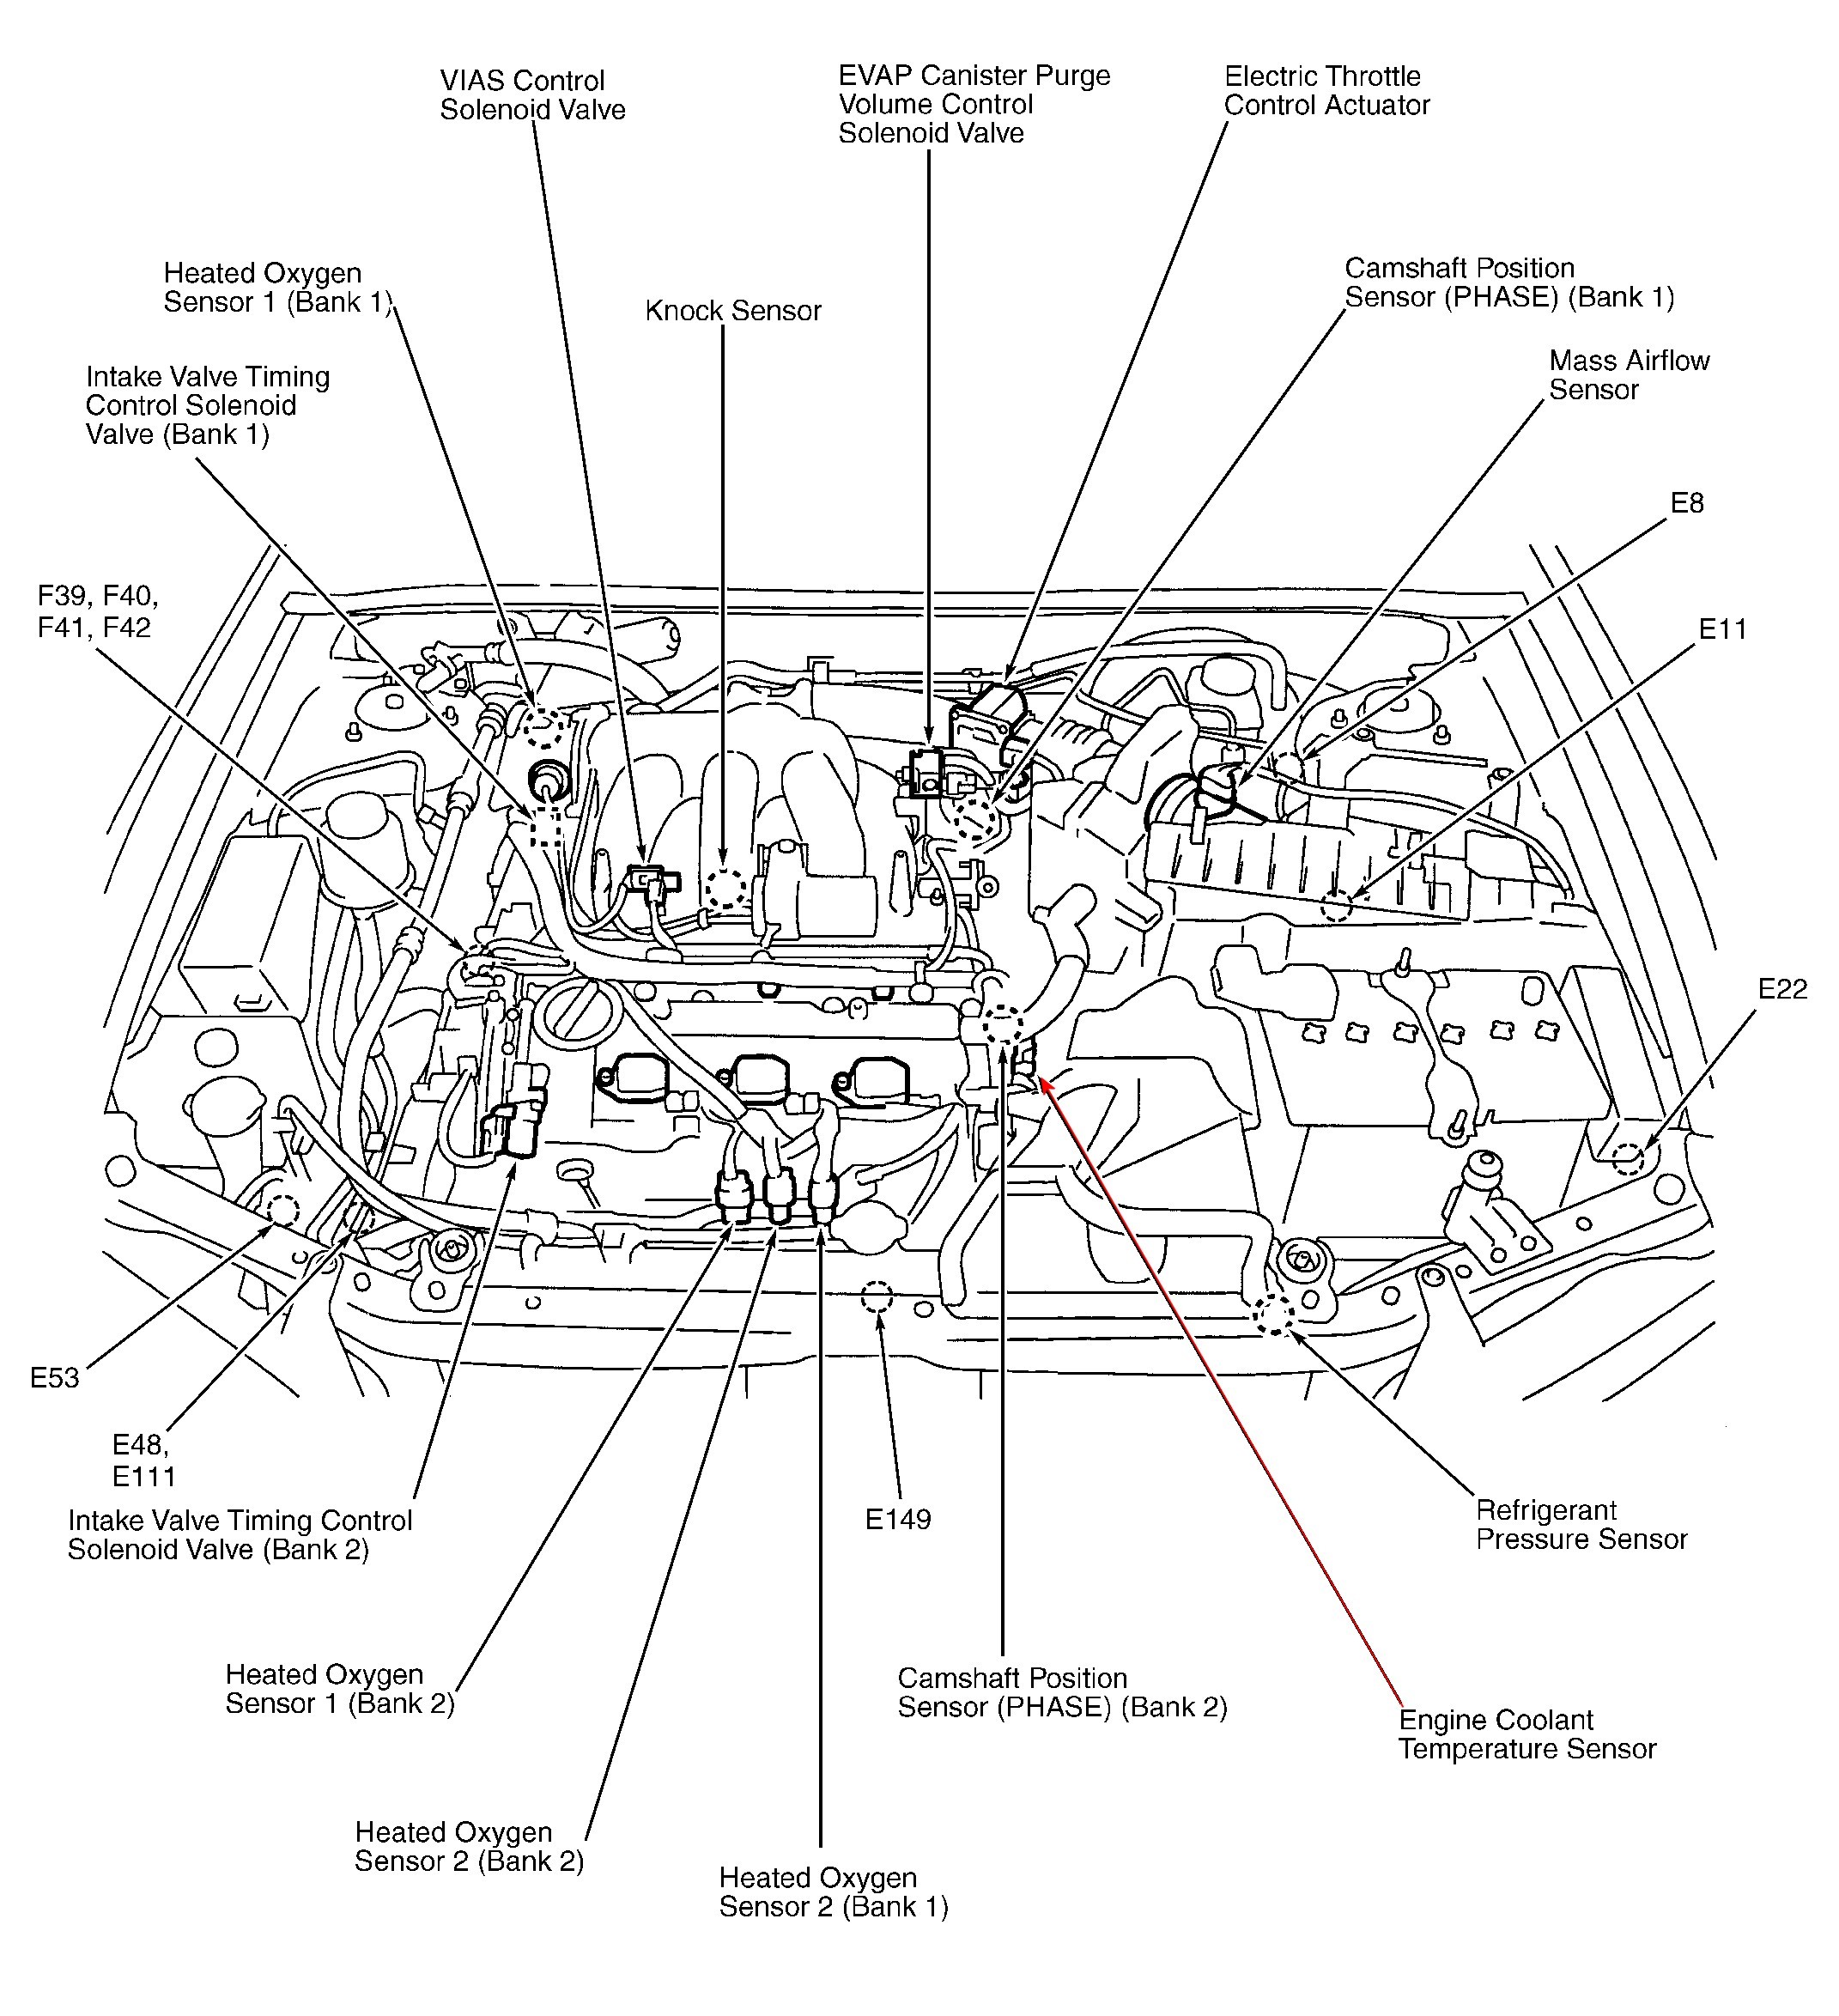 Car Engine Cooling System Diagram isuzu Engine Diagrams Simple Guide About Wiring Diagram Of Car Engine Cooling System Diagram